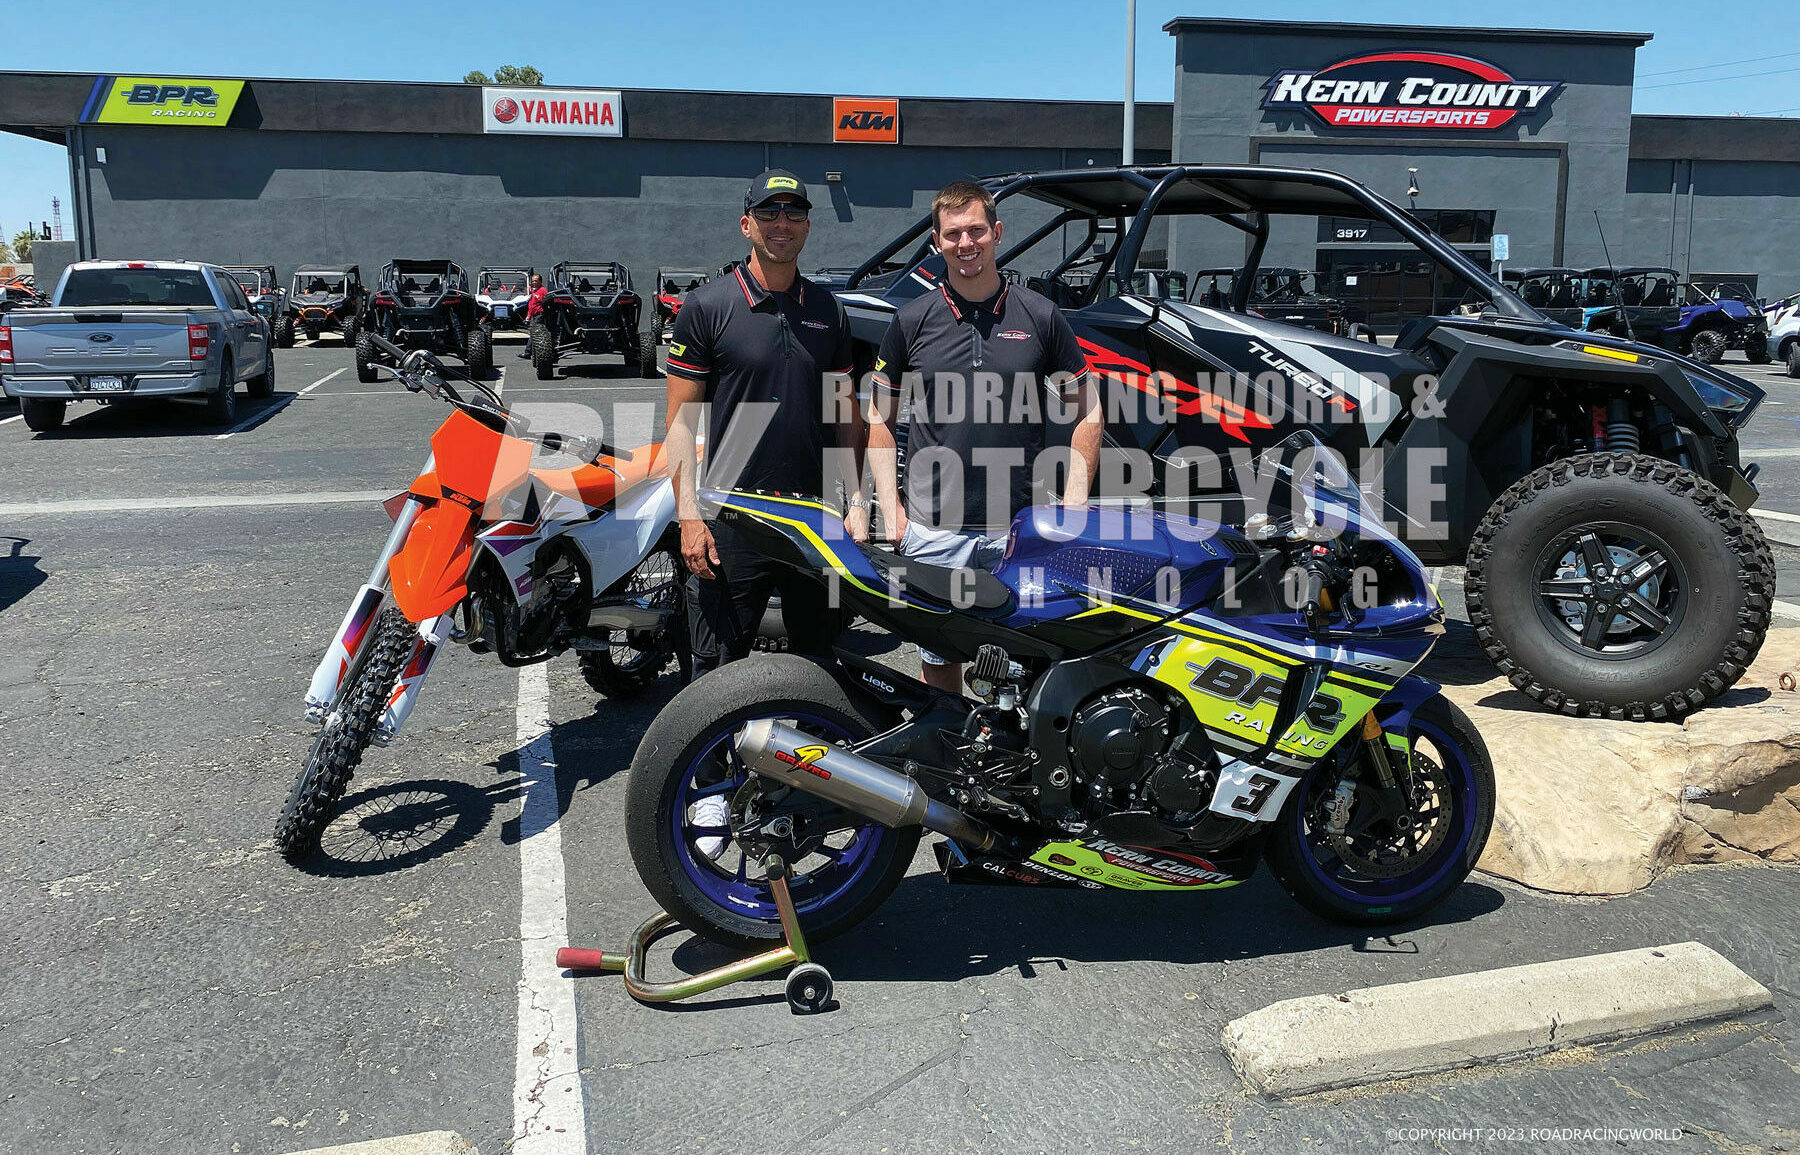 Racers Bryce Prince (right) and Fabrice Vilder (left) are the new owners of Kern County Powersports in Bakersfield, California. Photos by David Swarts.  